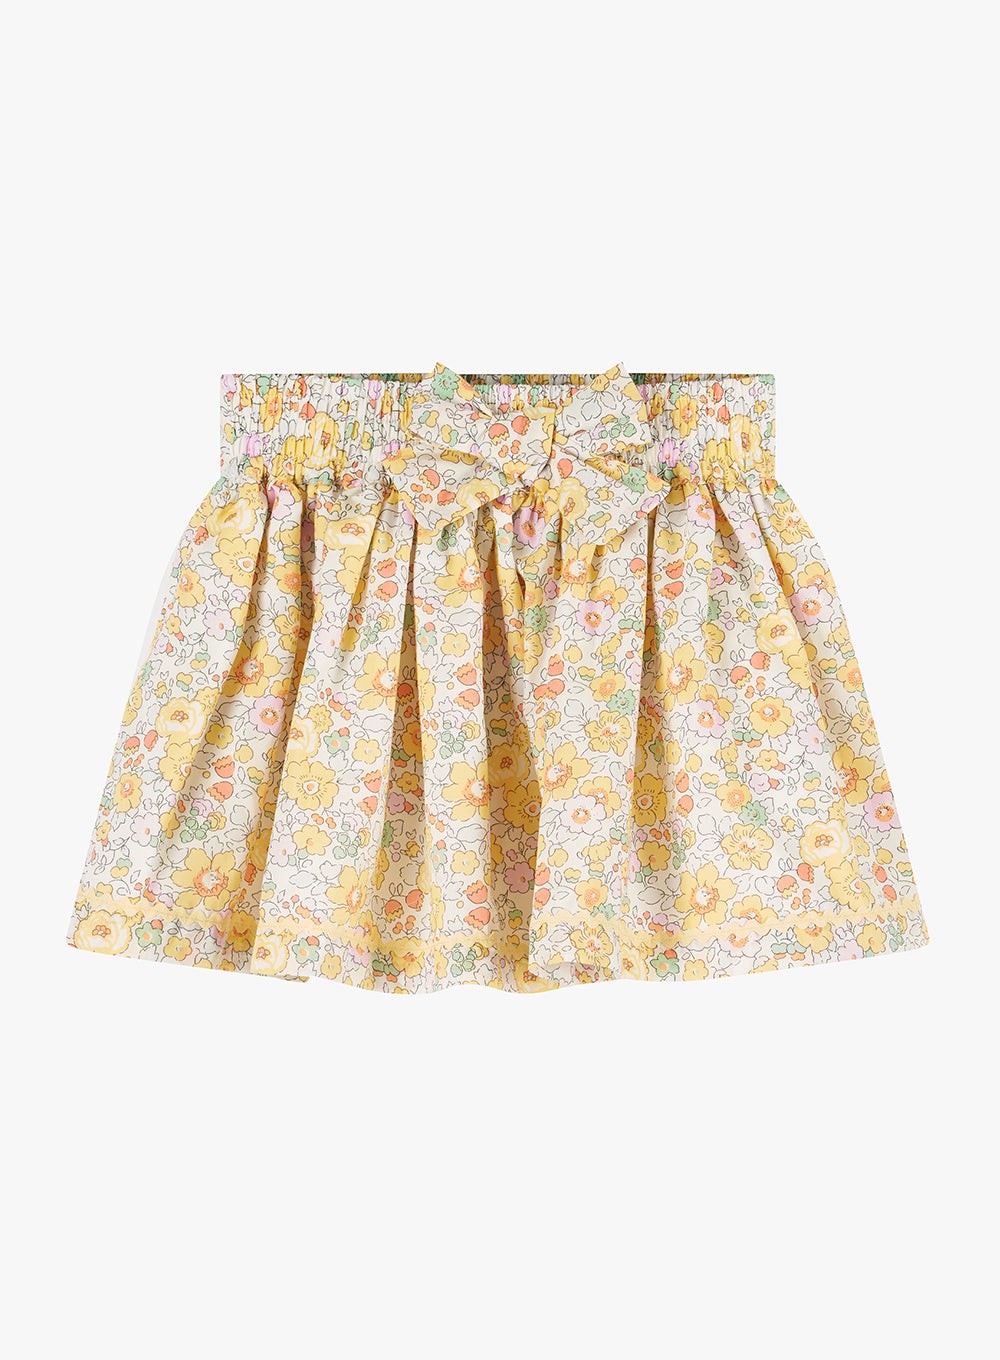 Lily Rose Skirt Bow Skirt in Buttercup Betsy